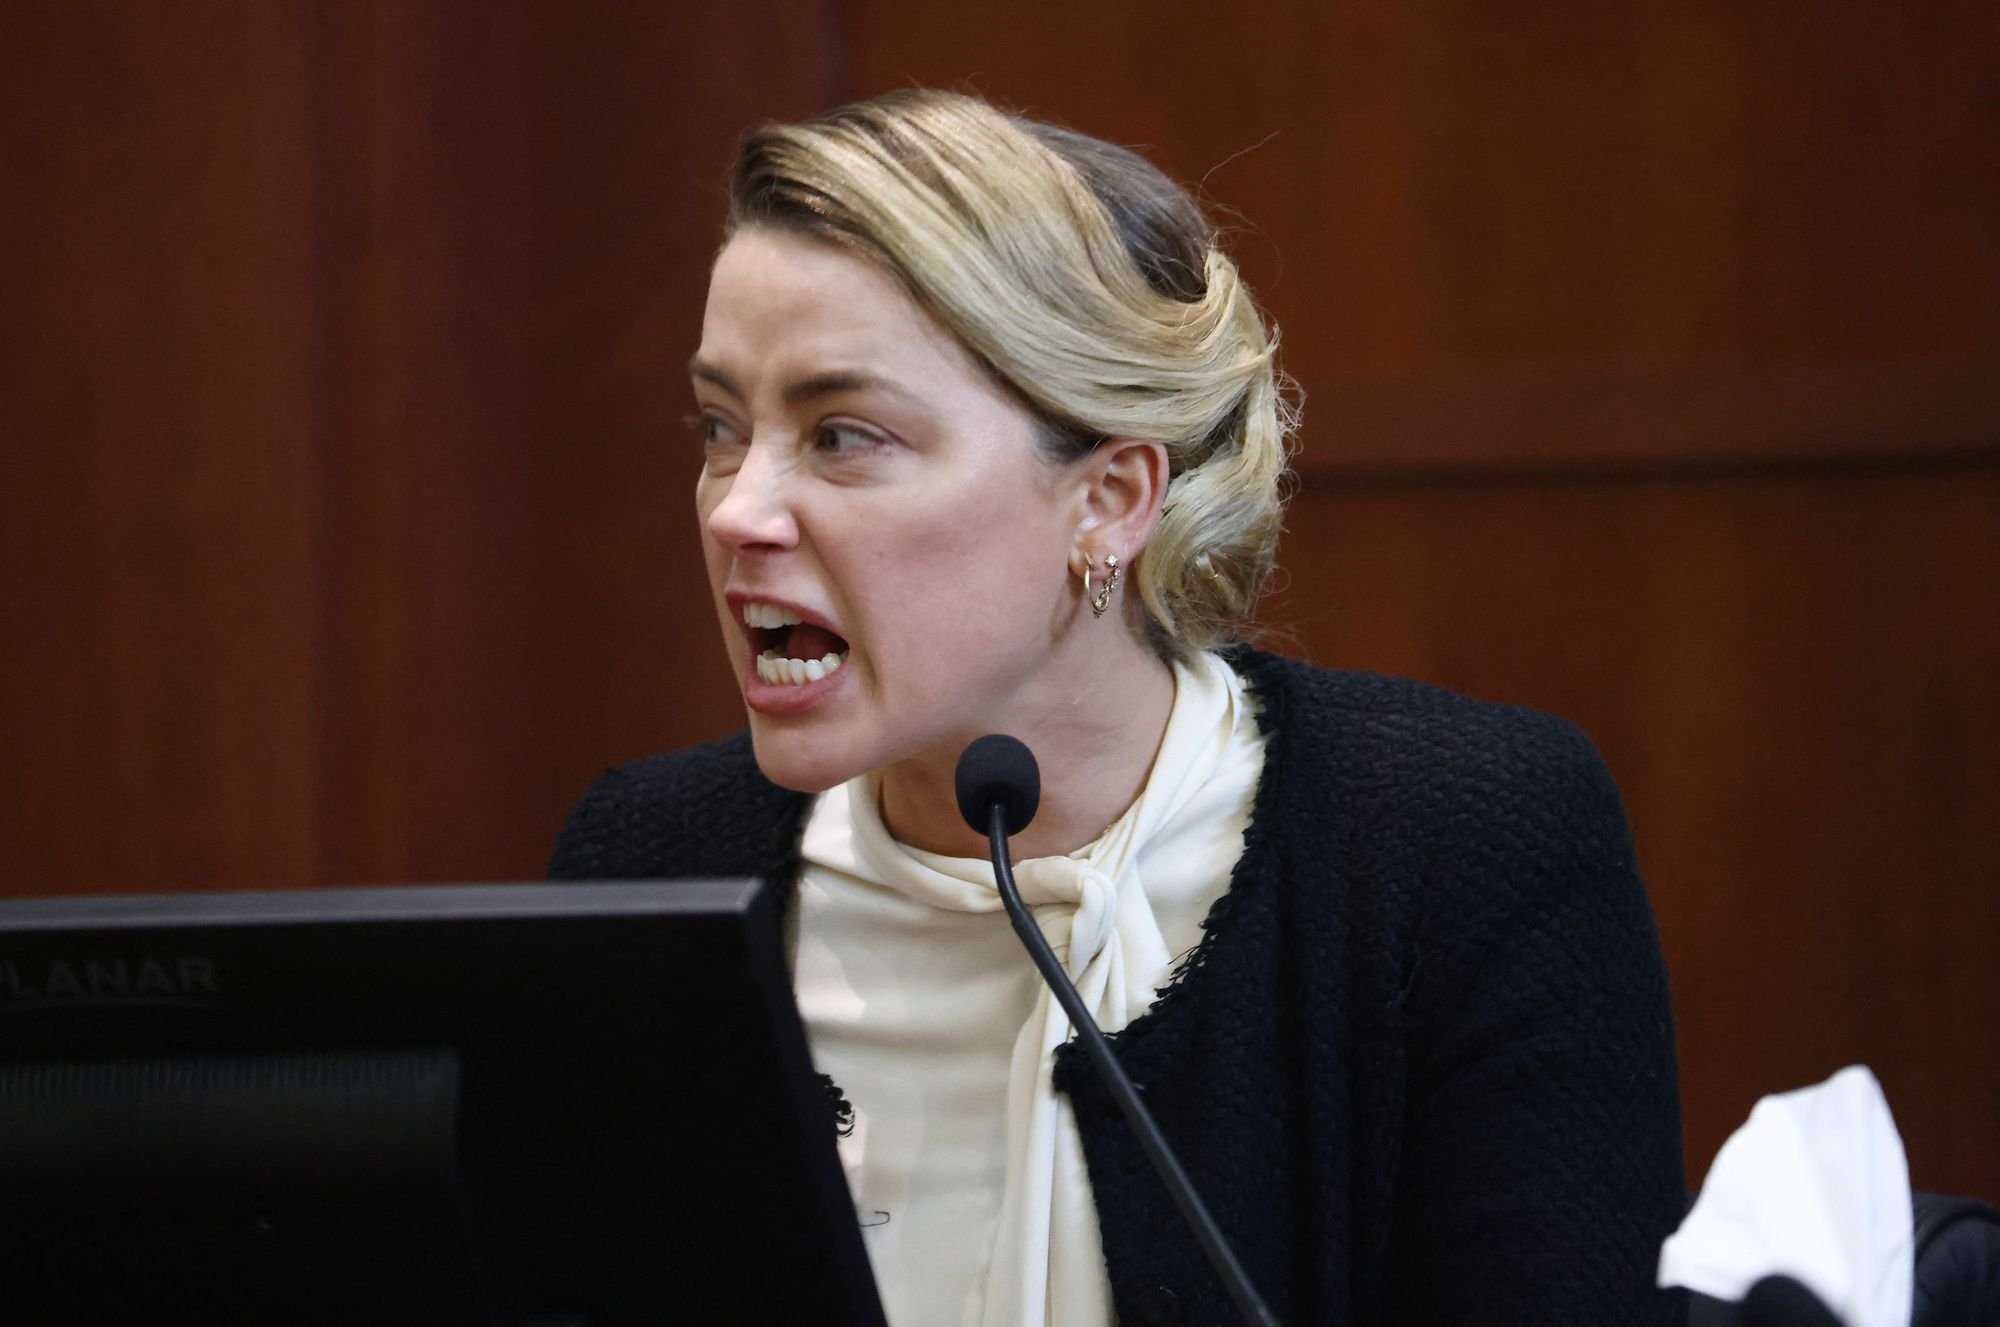 Amber Heard, seen here wearing a white shirt with a black sweater in court, was accused by Johnny Depp's lawyer of editing her photos.